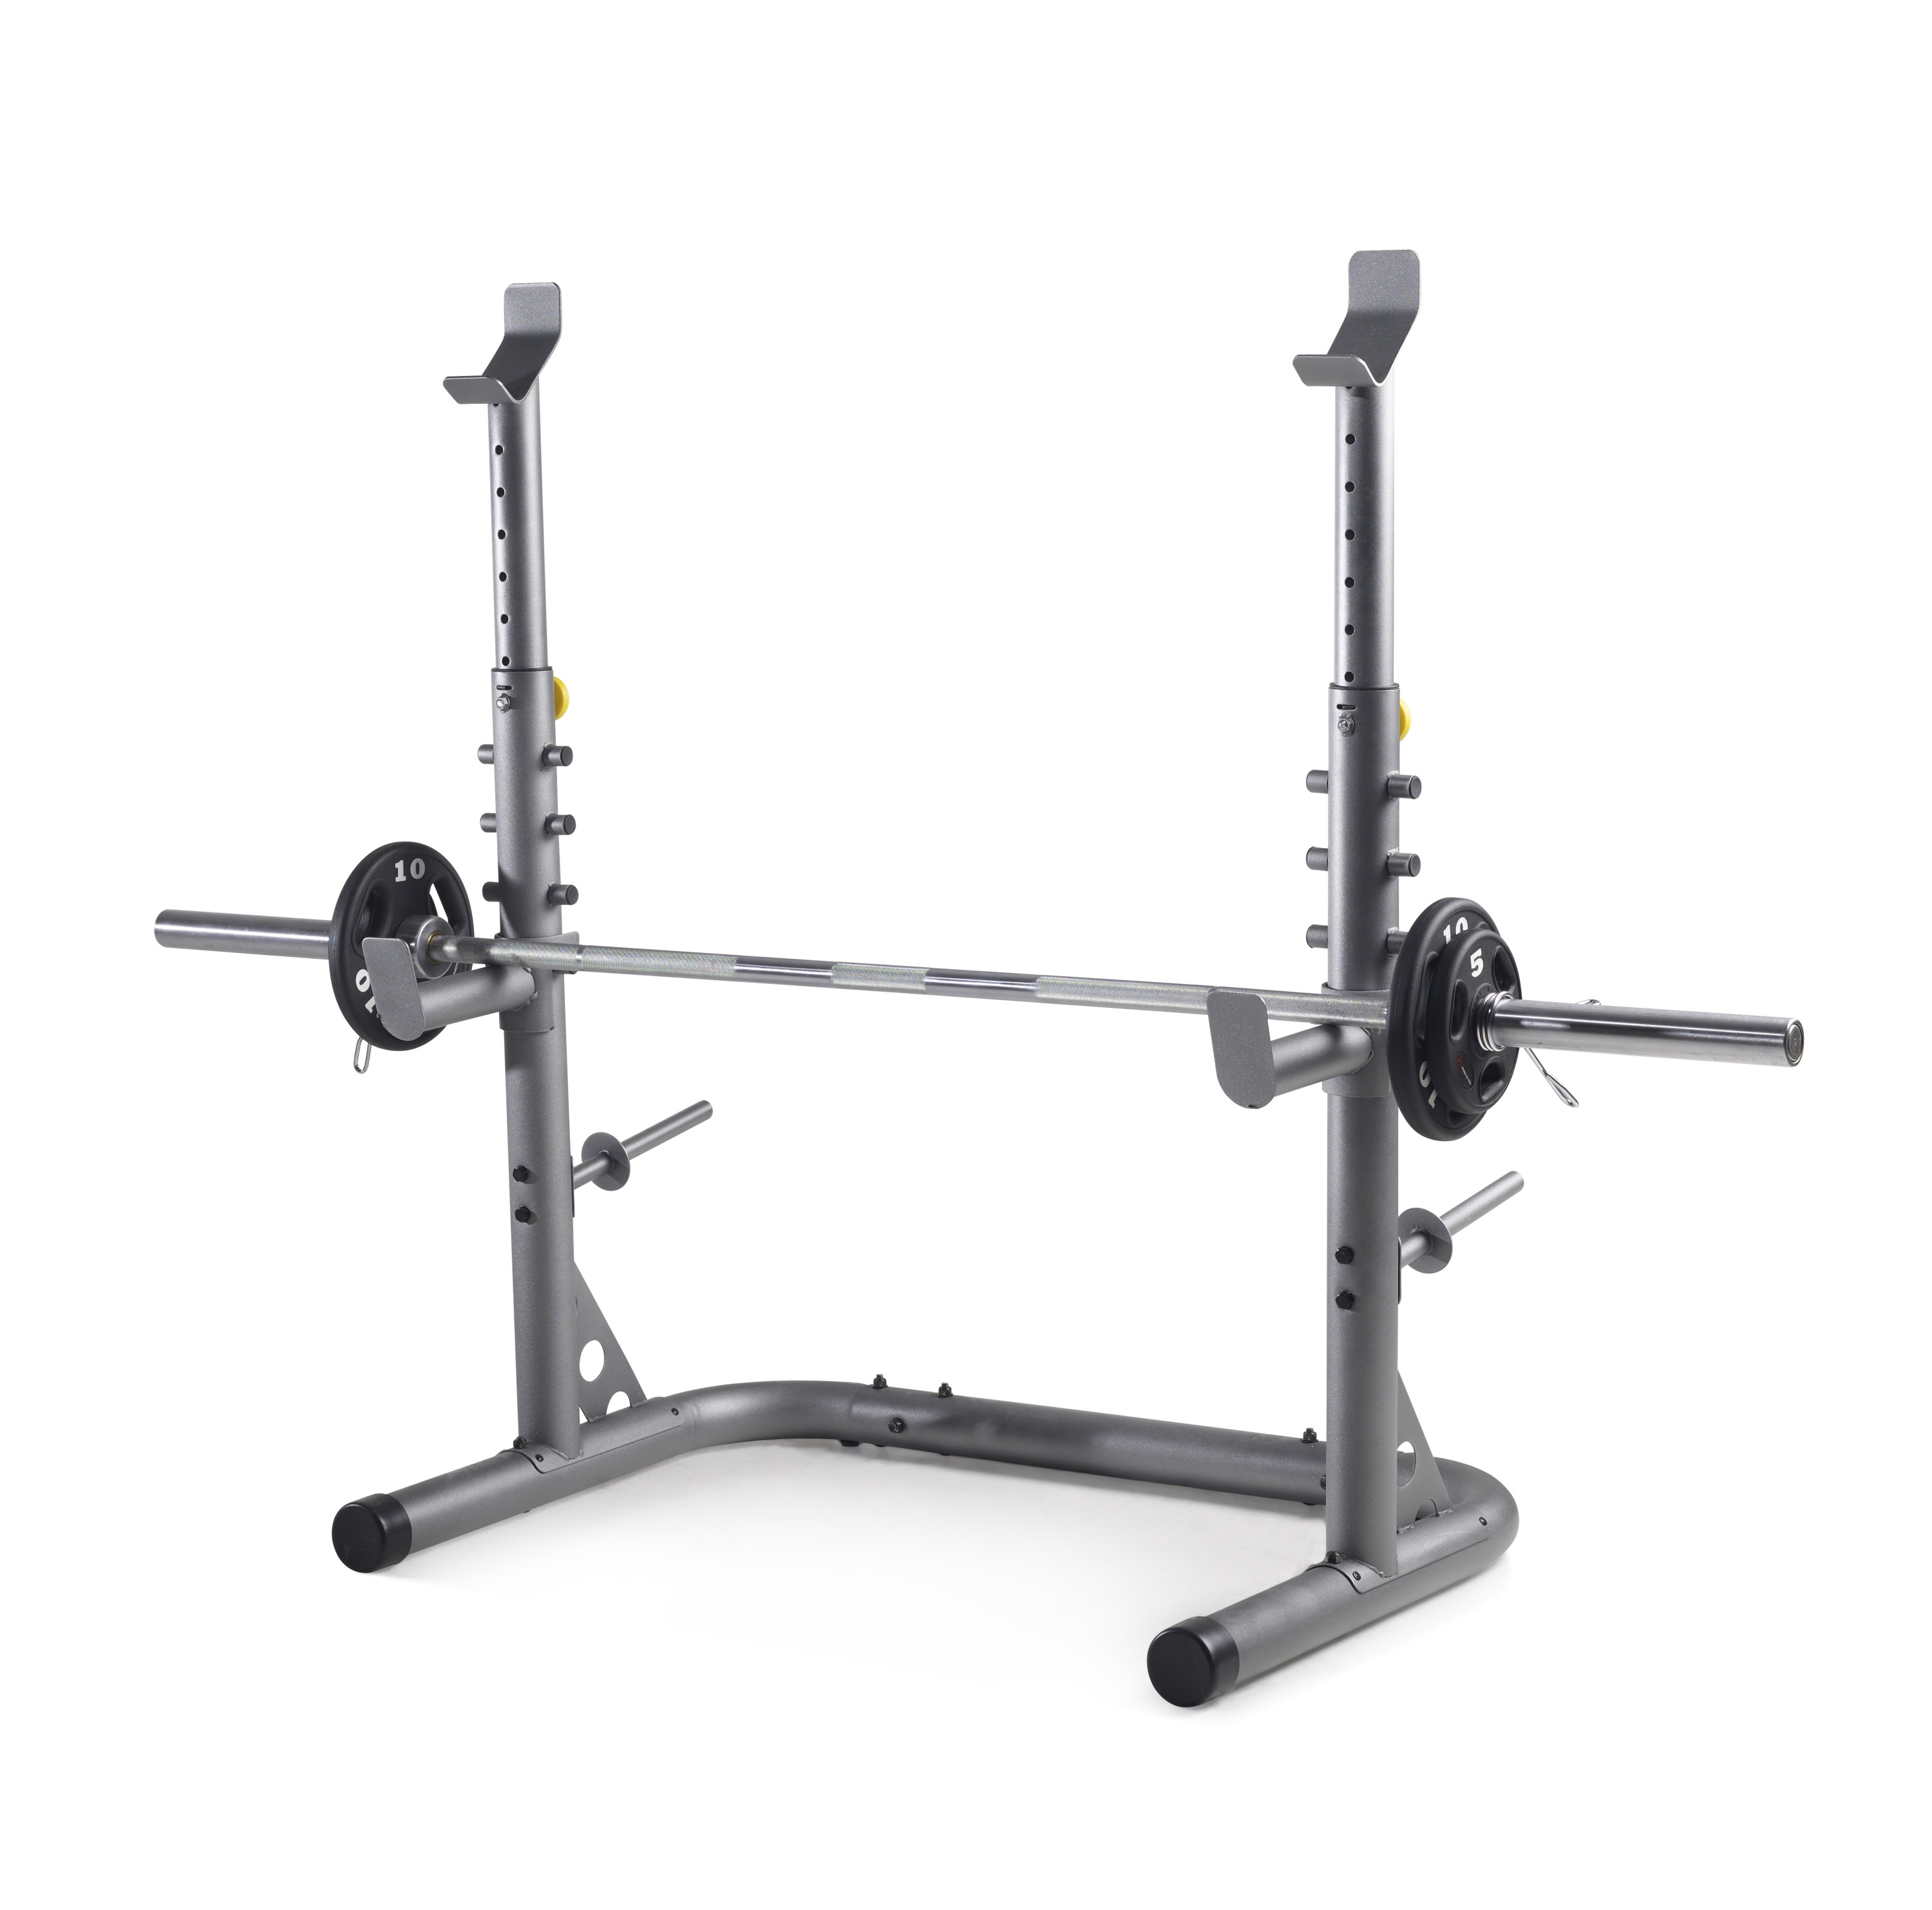 Weider XRS 20 Olympic Squat Rack with 300 Lb. Weight Limit - image 3 of 11